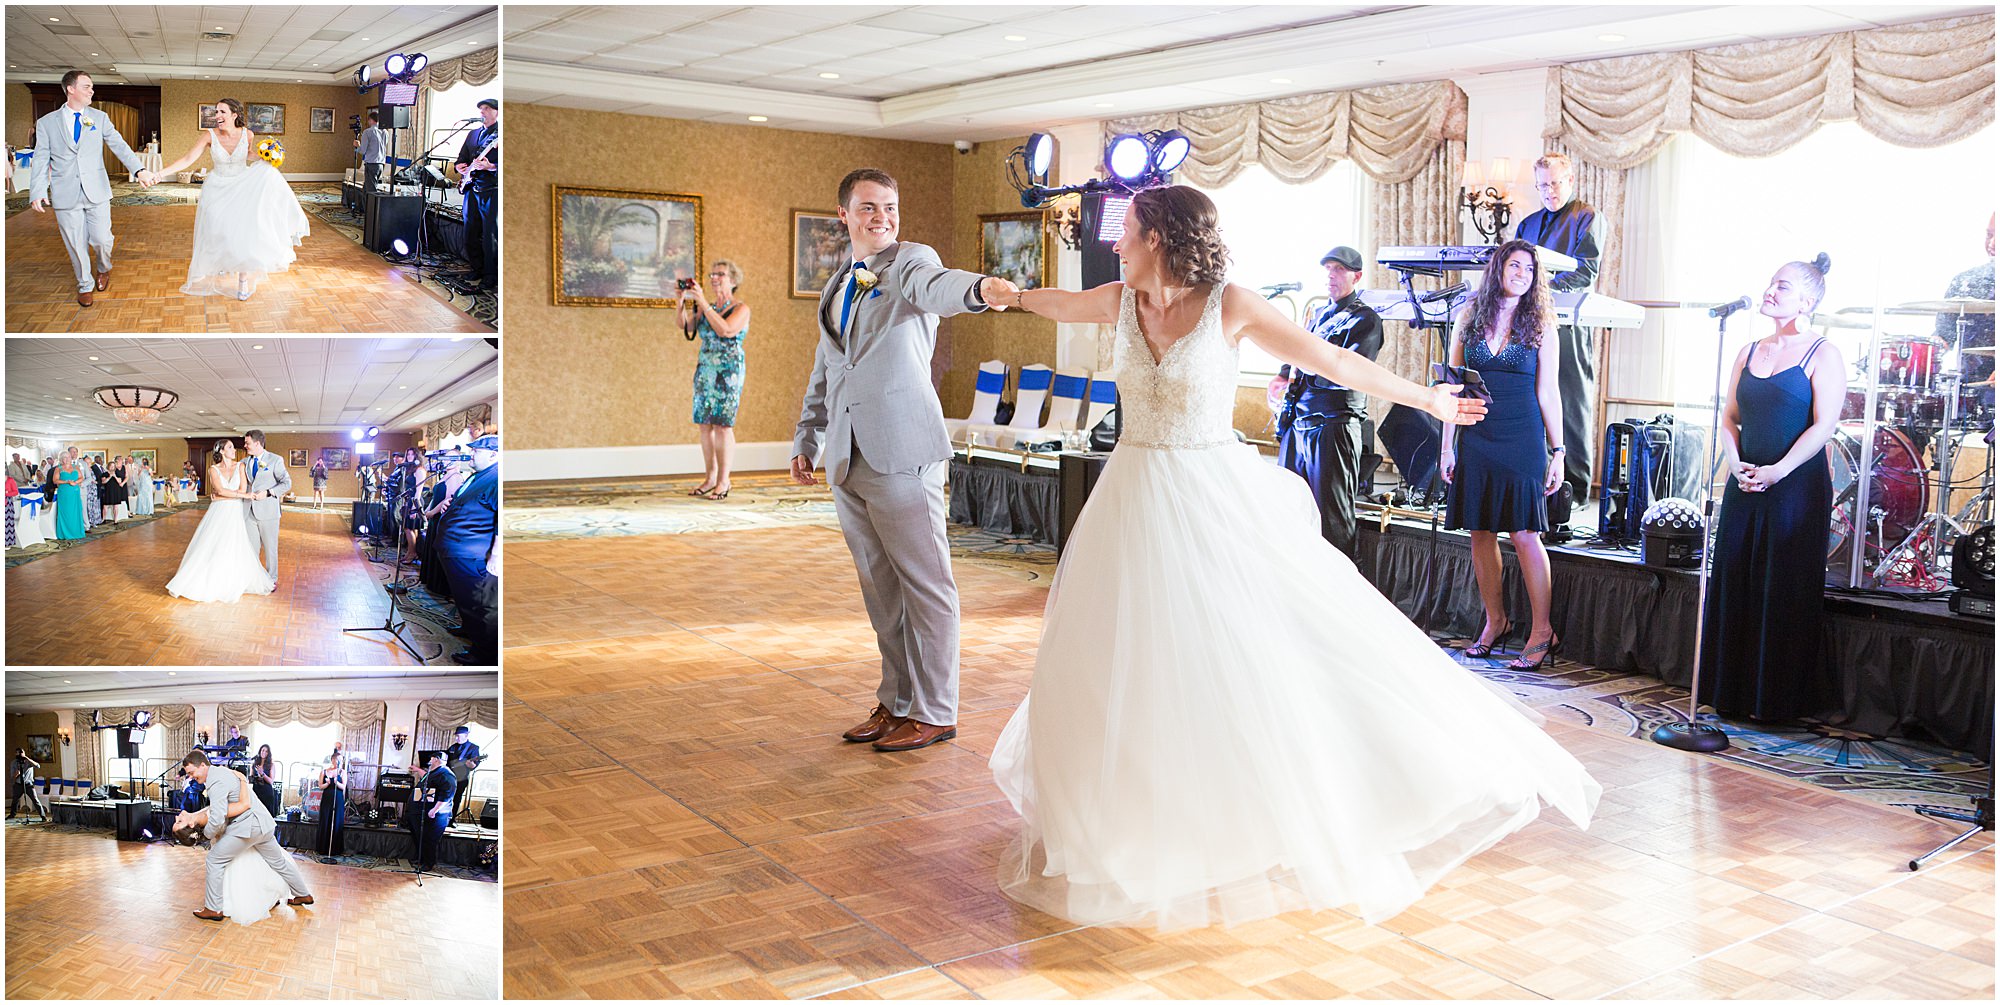 Bride & groom share first dance at The Grand Hotel Cape May wedding